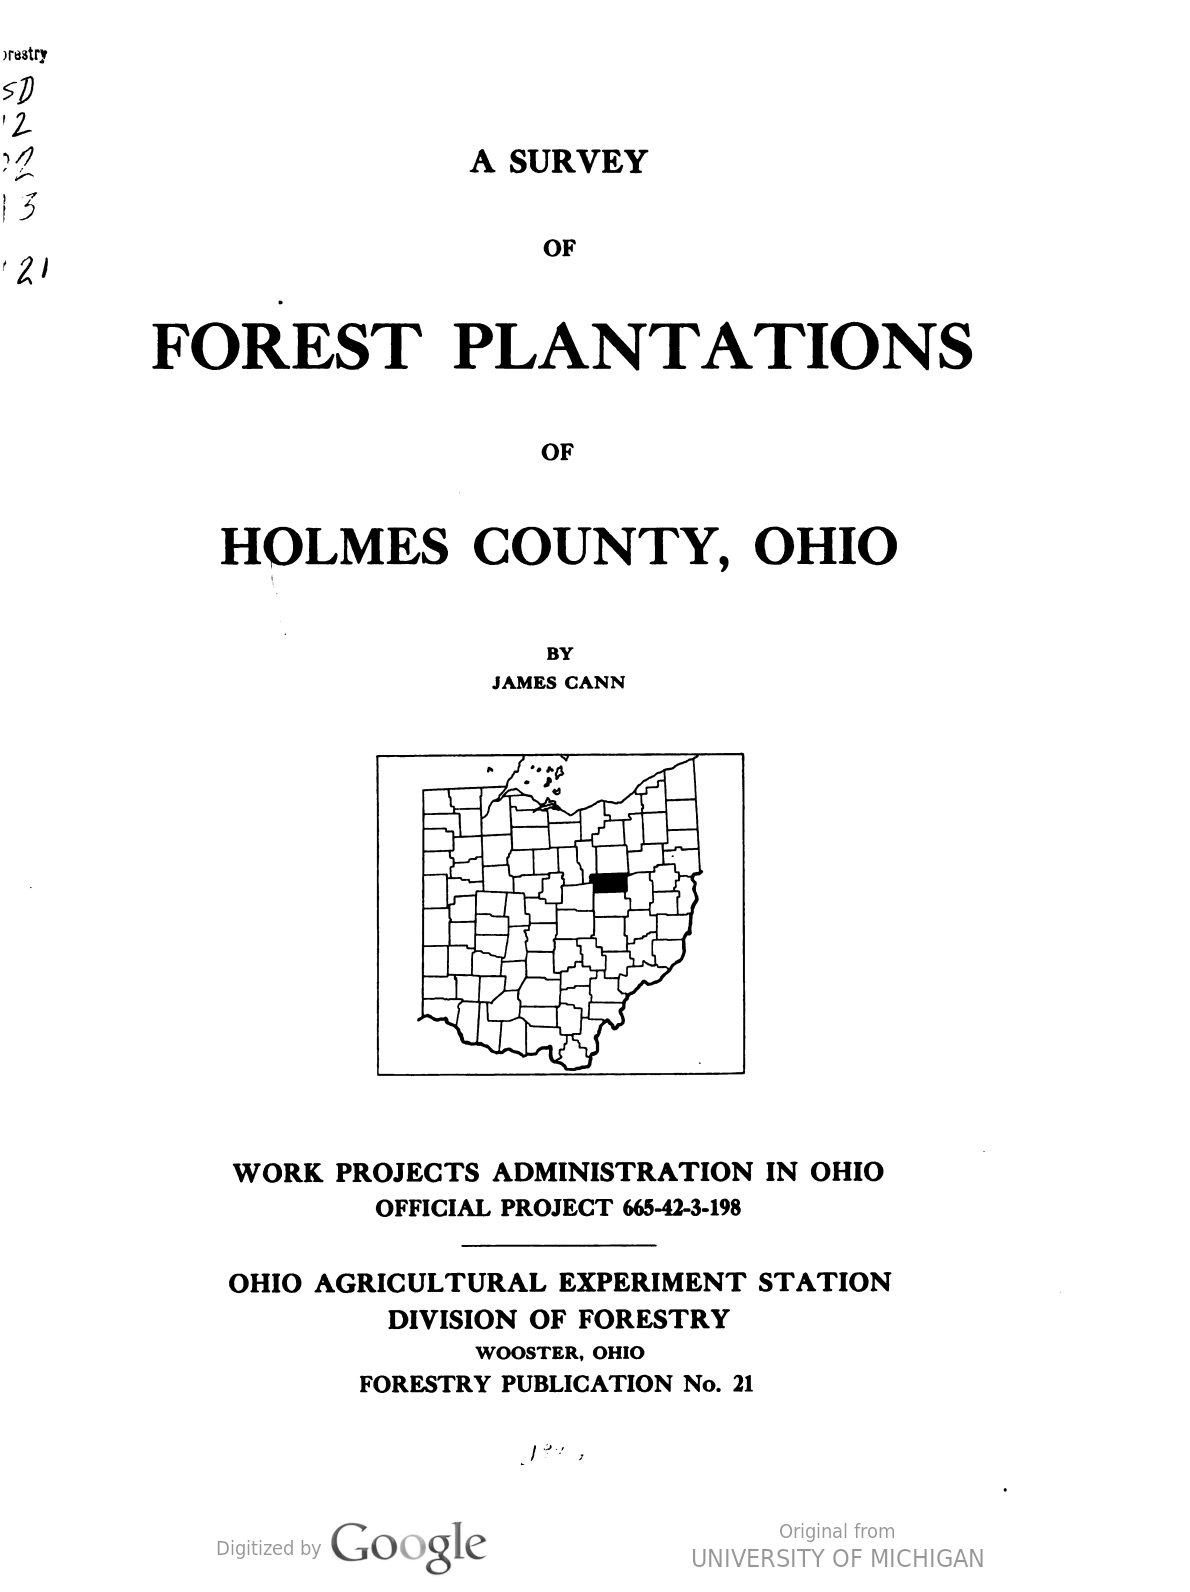 Forestry publication Preview